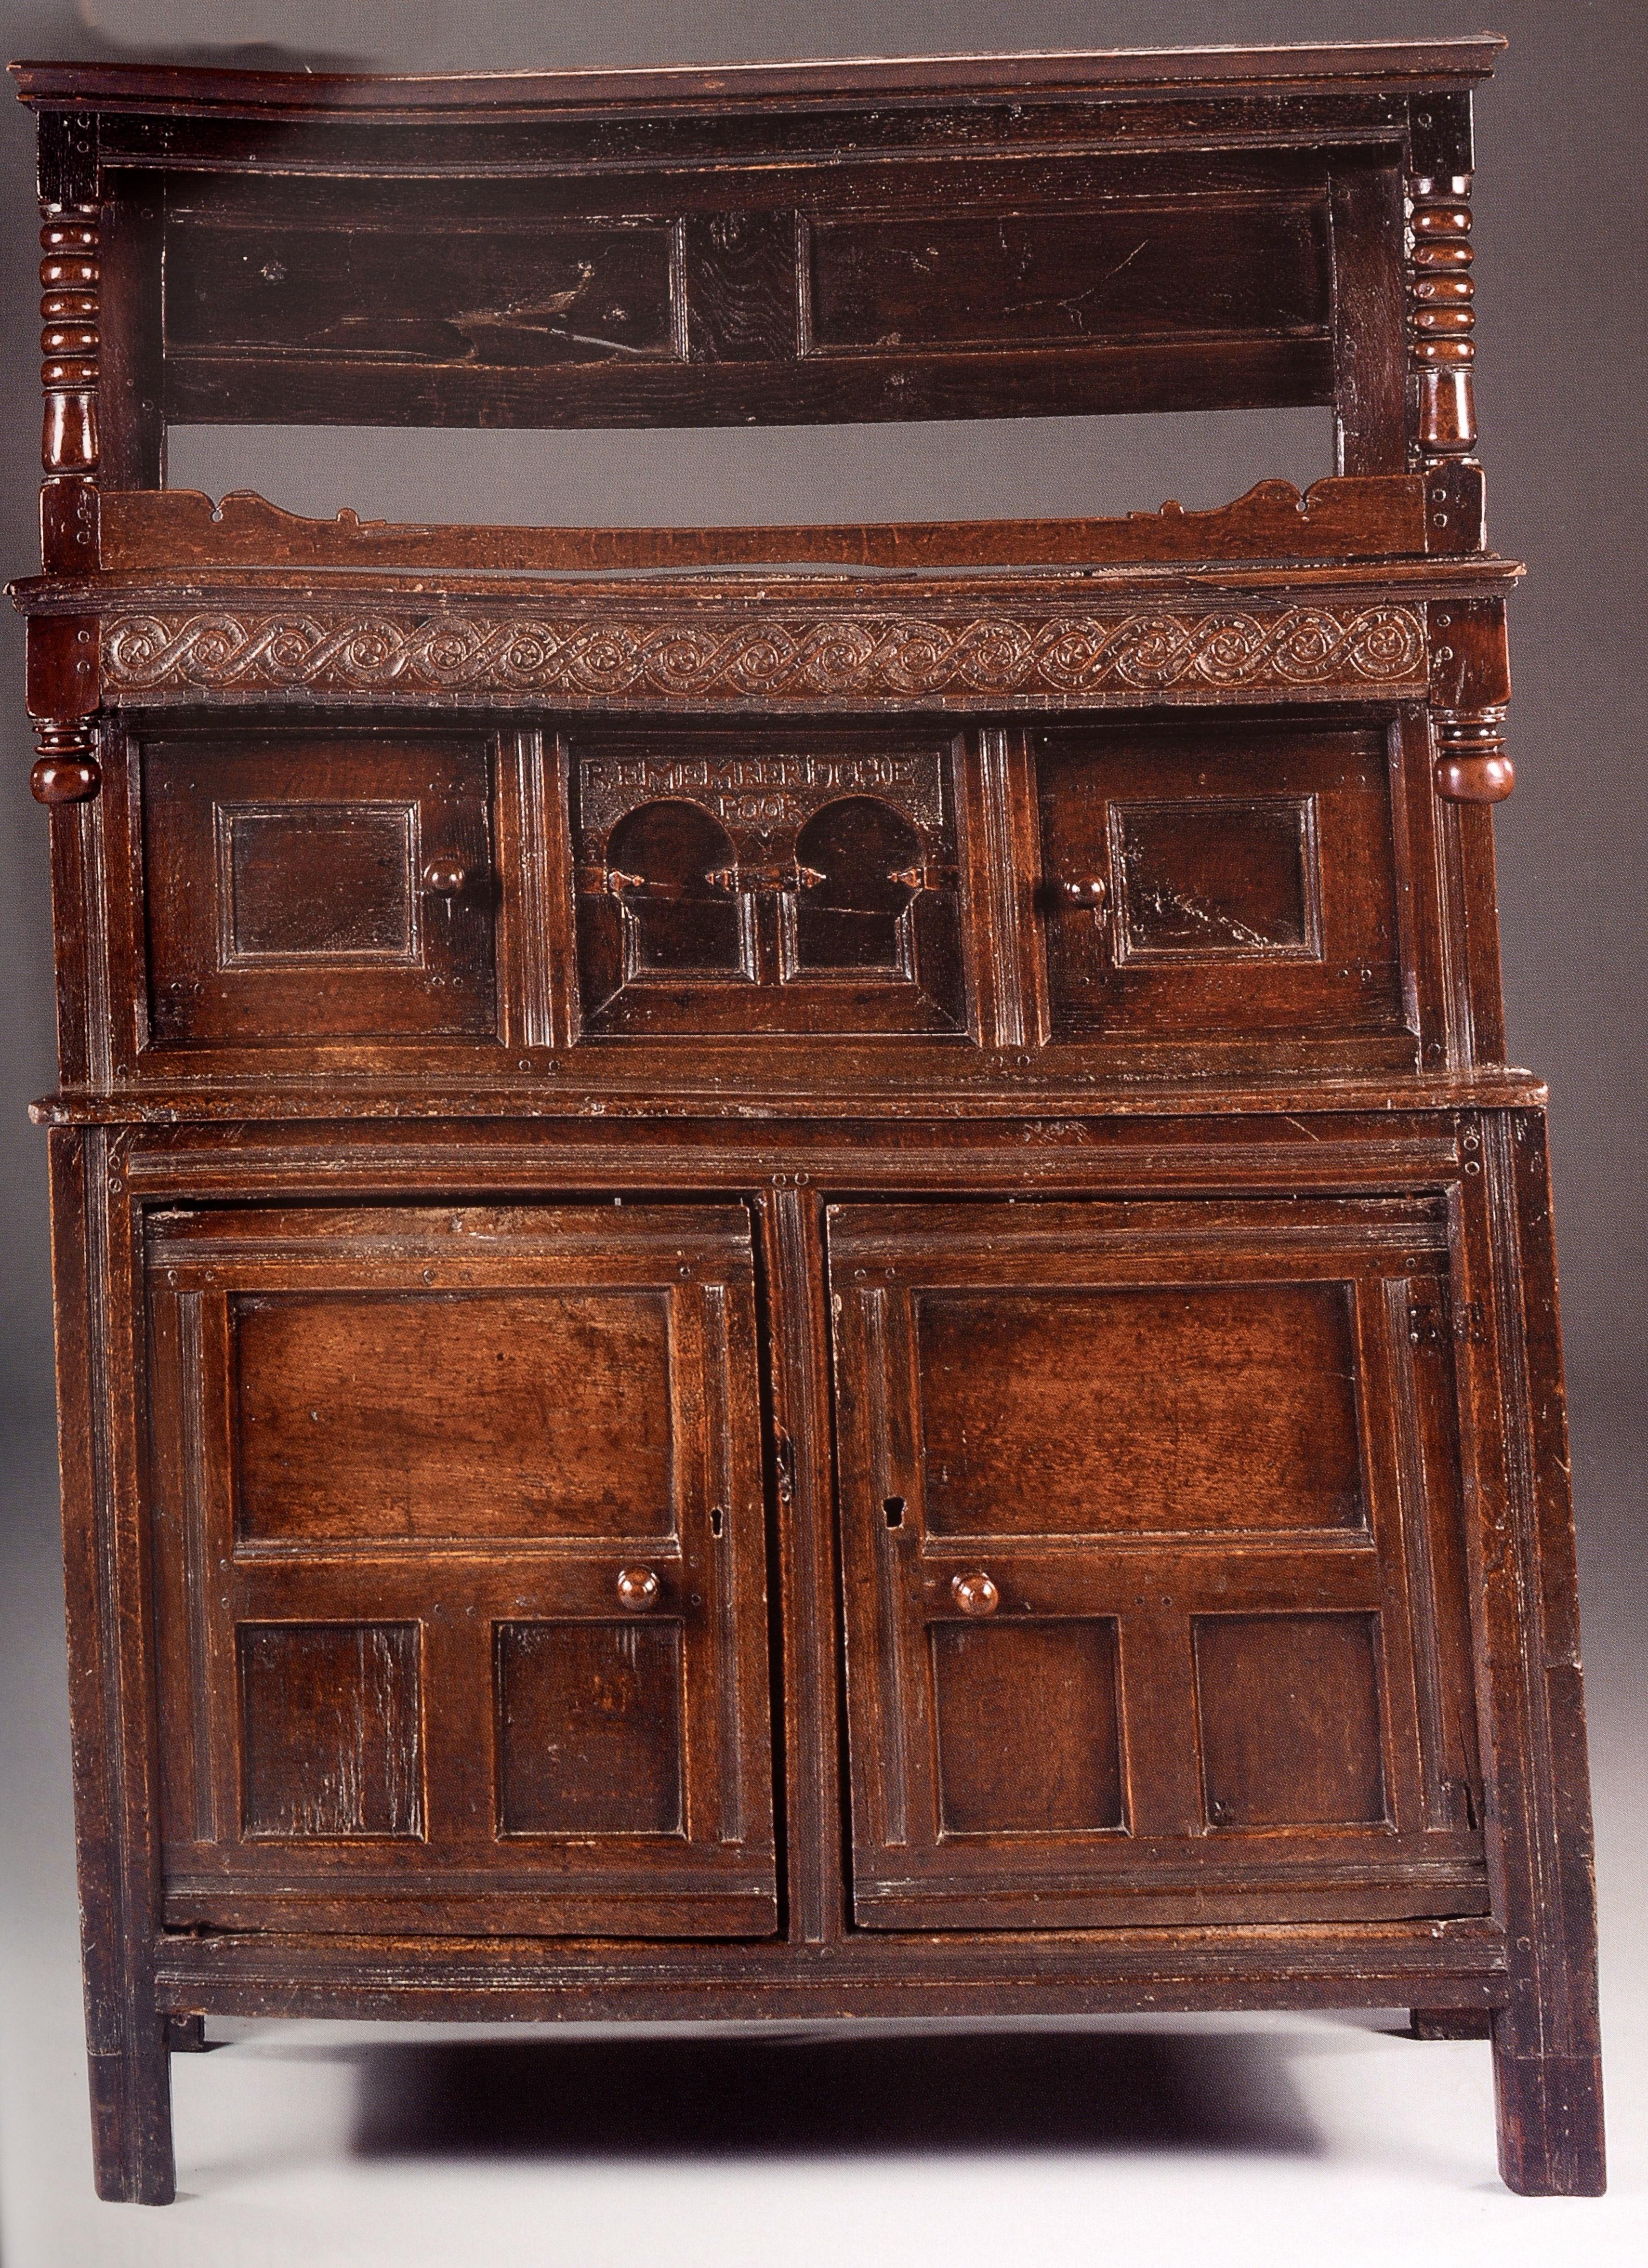 An Important Collection of Early Oak Furniture and Metalwork Removed from The Manor House, Bramcote, Nottingham. 24 May 2001, Christie's. Catalogue for a sale of early furniture and wares from The Manor House, Bramcote, held by Christie's in London